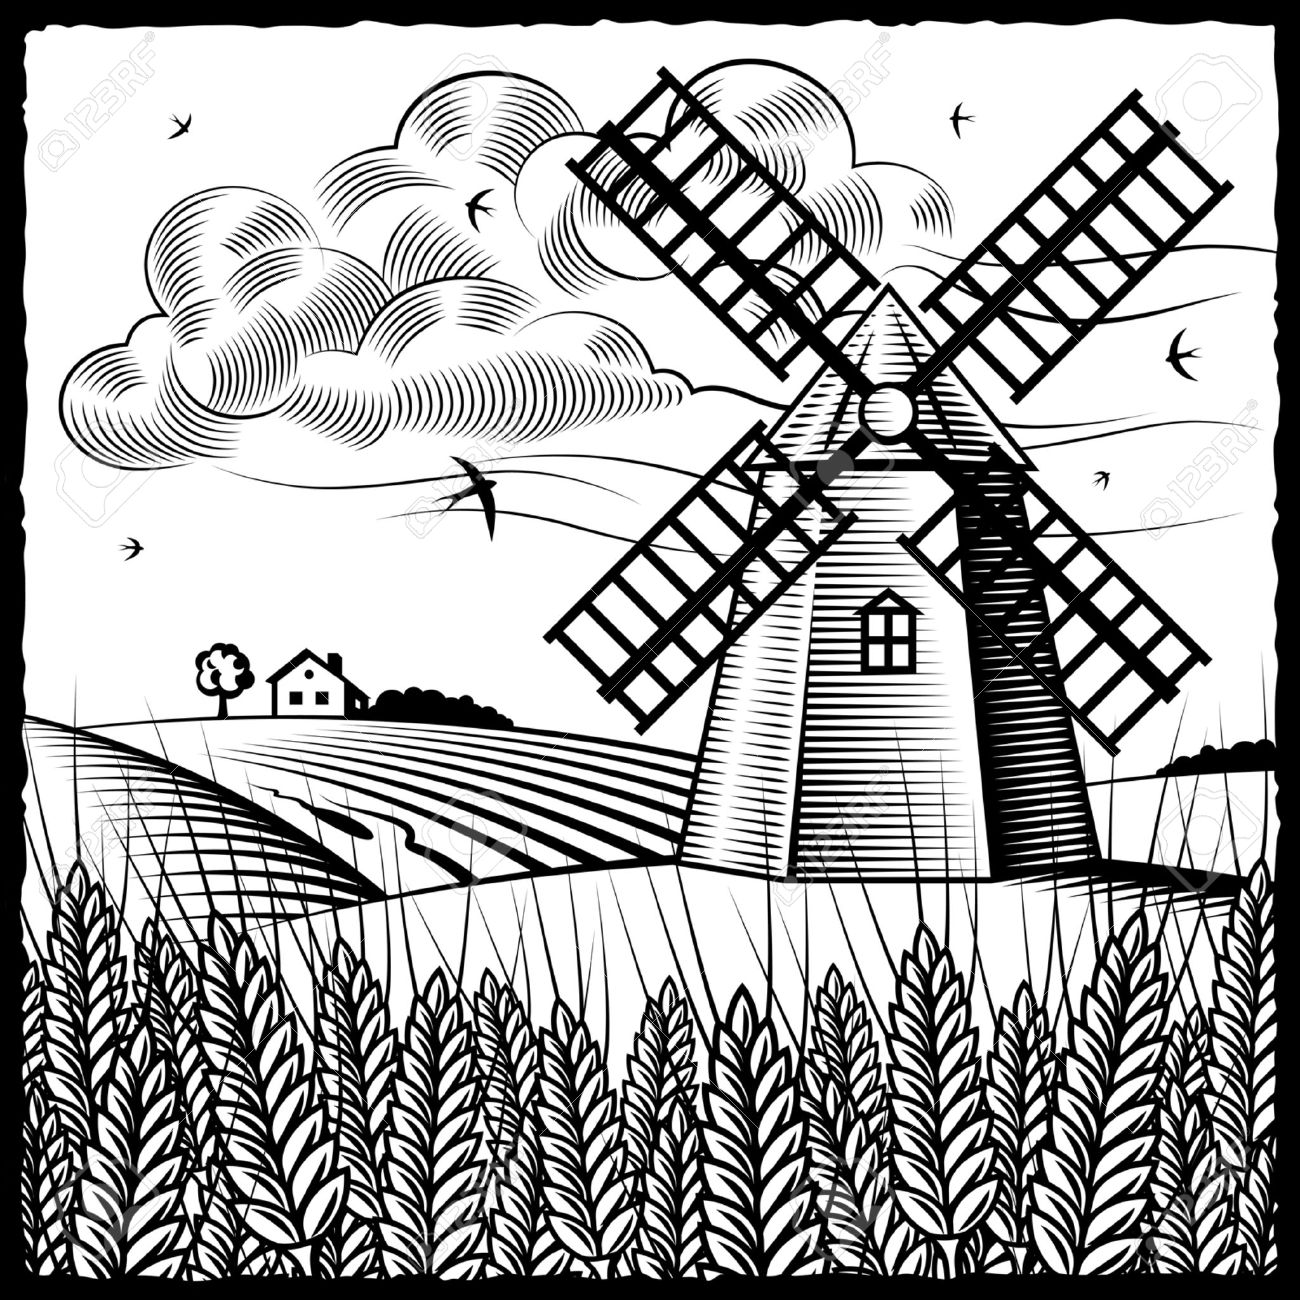 Countryside clipart black and white 